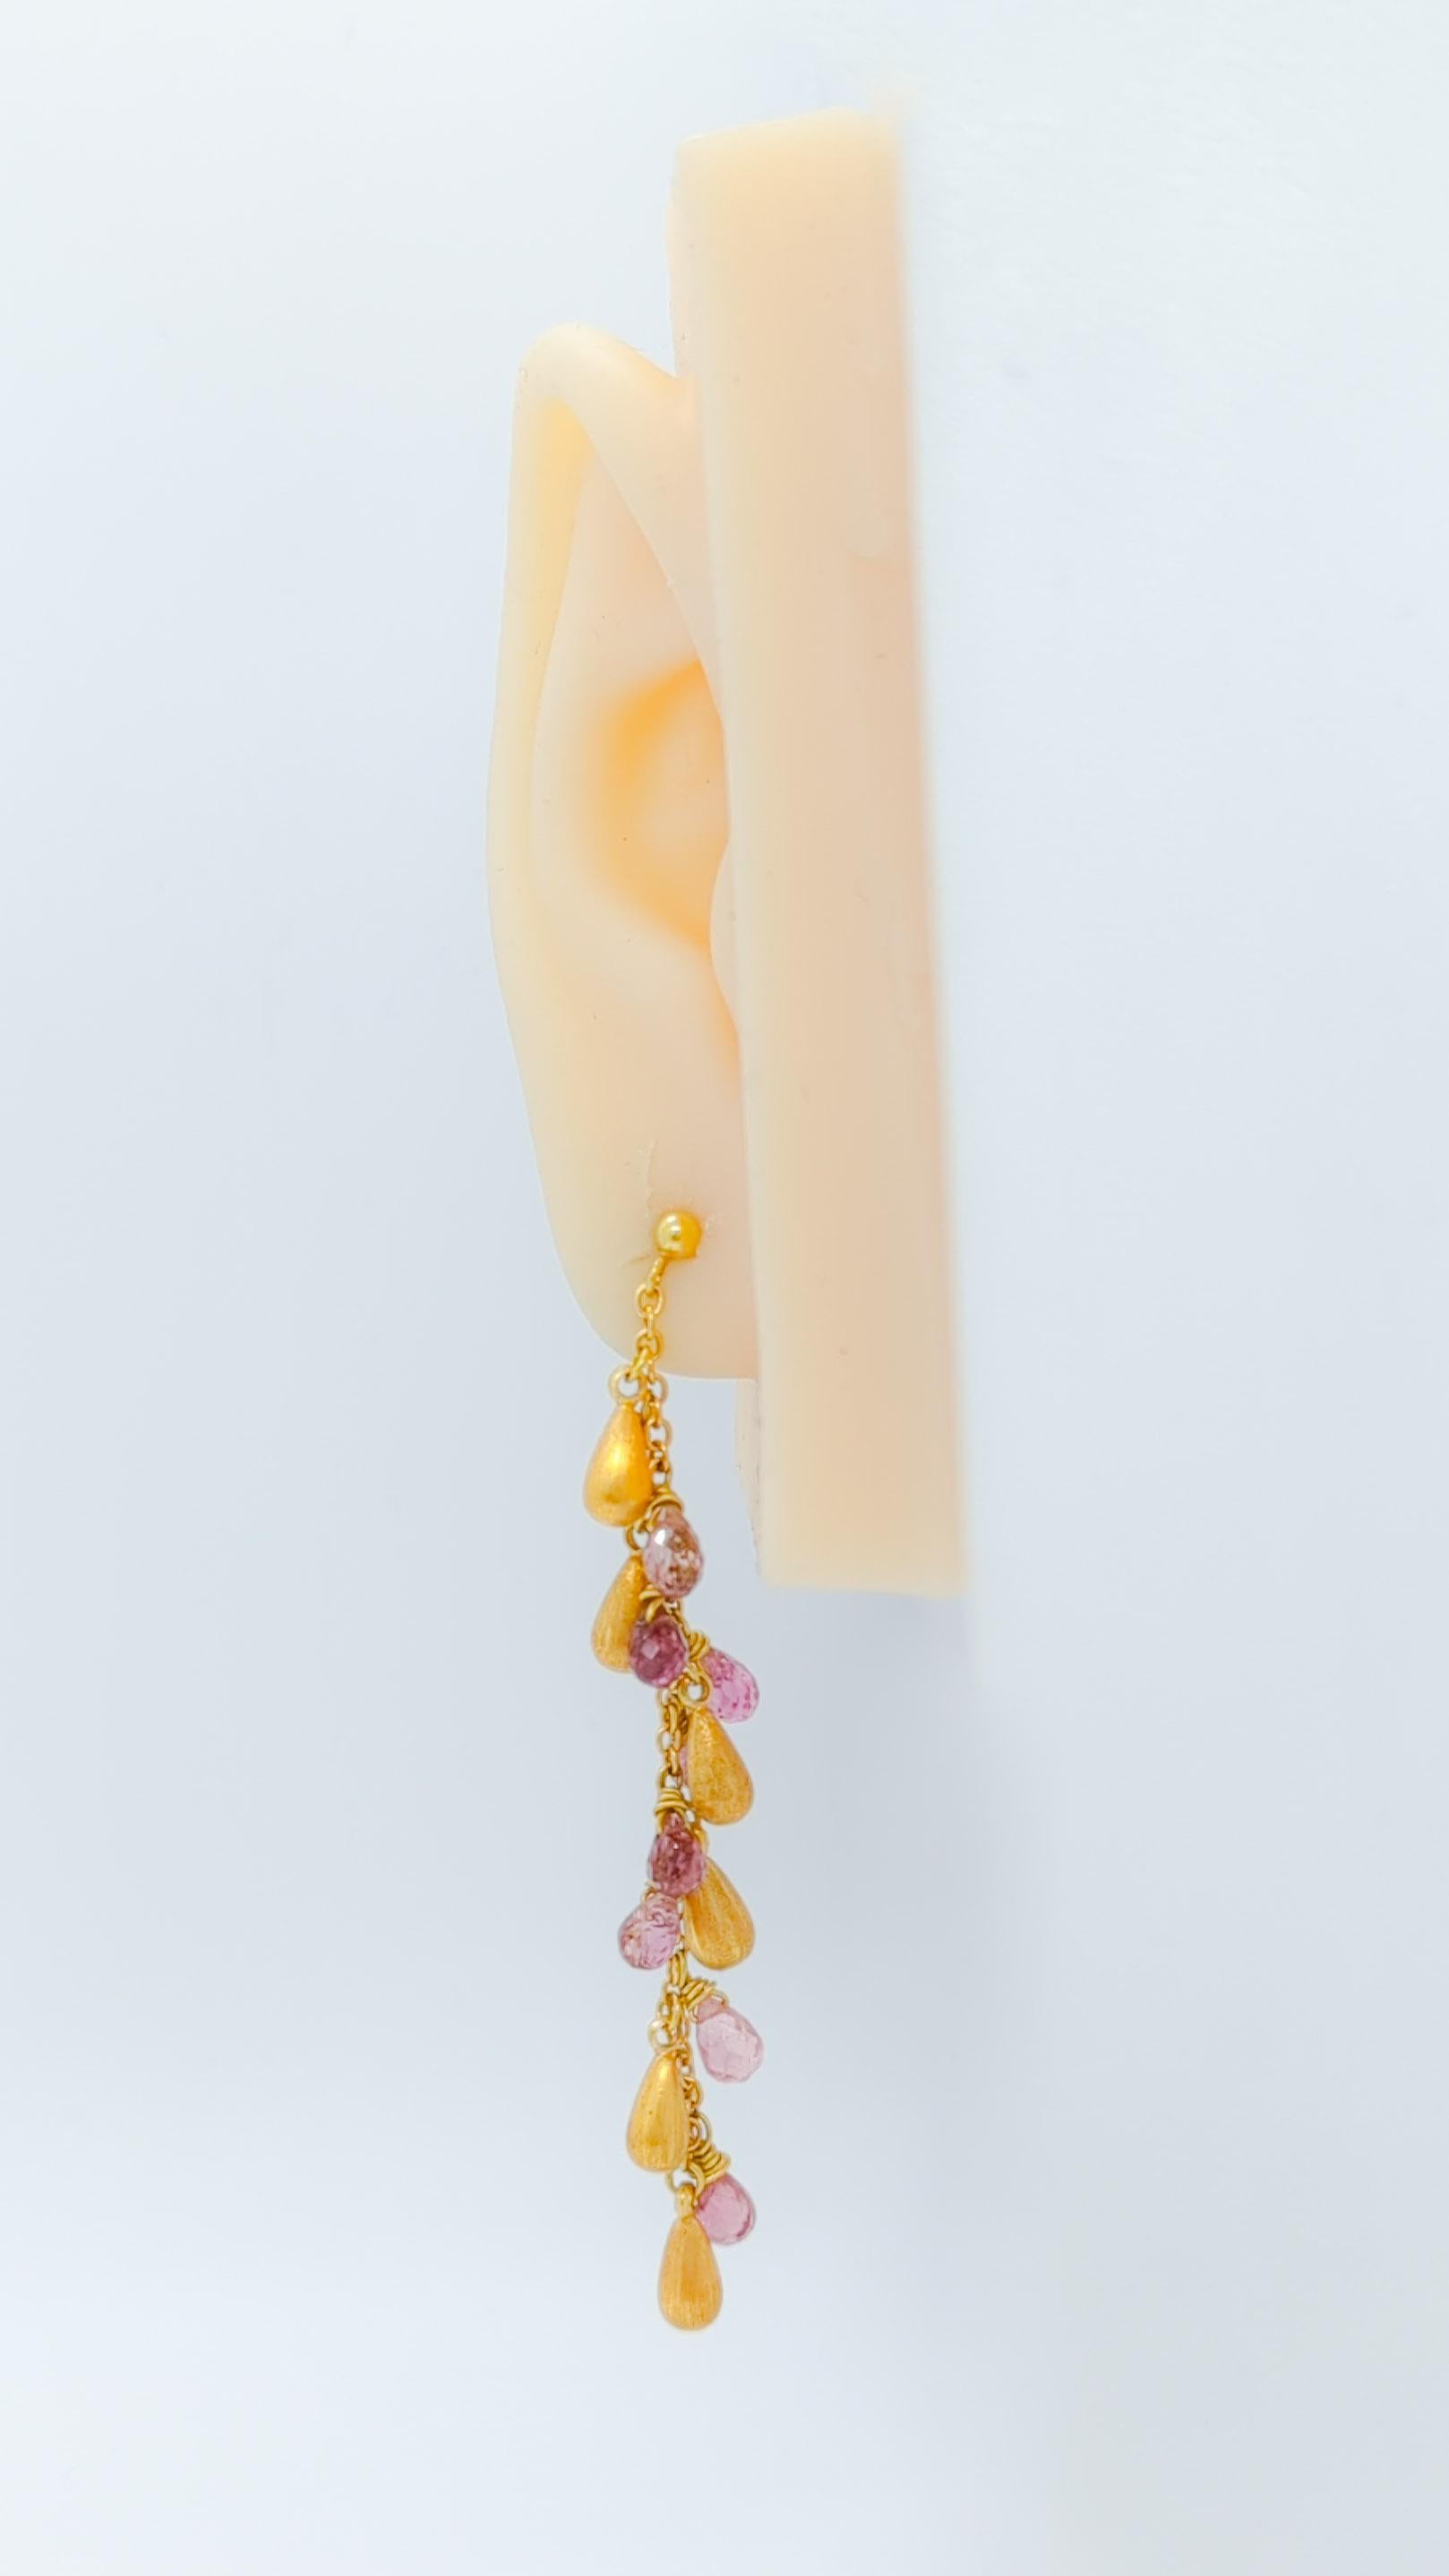 Estate H. Stern pink tourmaline briolette dangle earrings handmade in 18k yellow gold.  Push back setting.  Easy and lightweight.